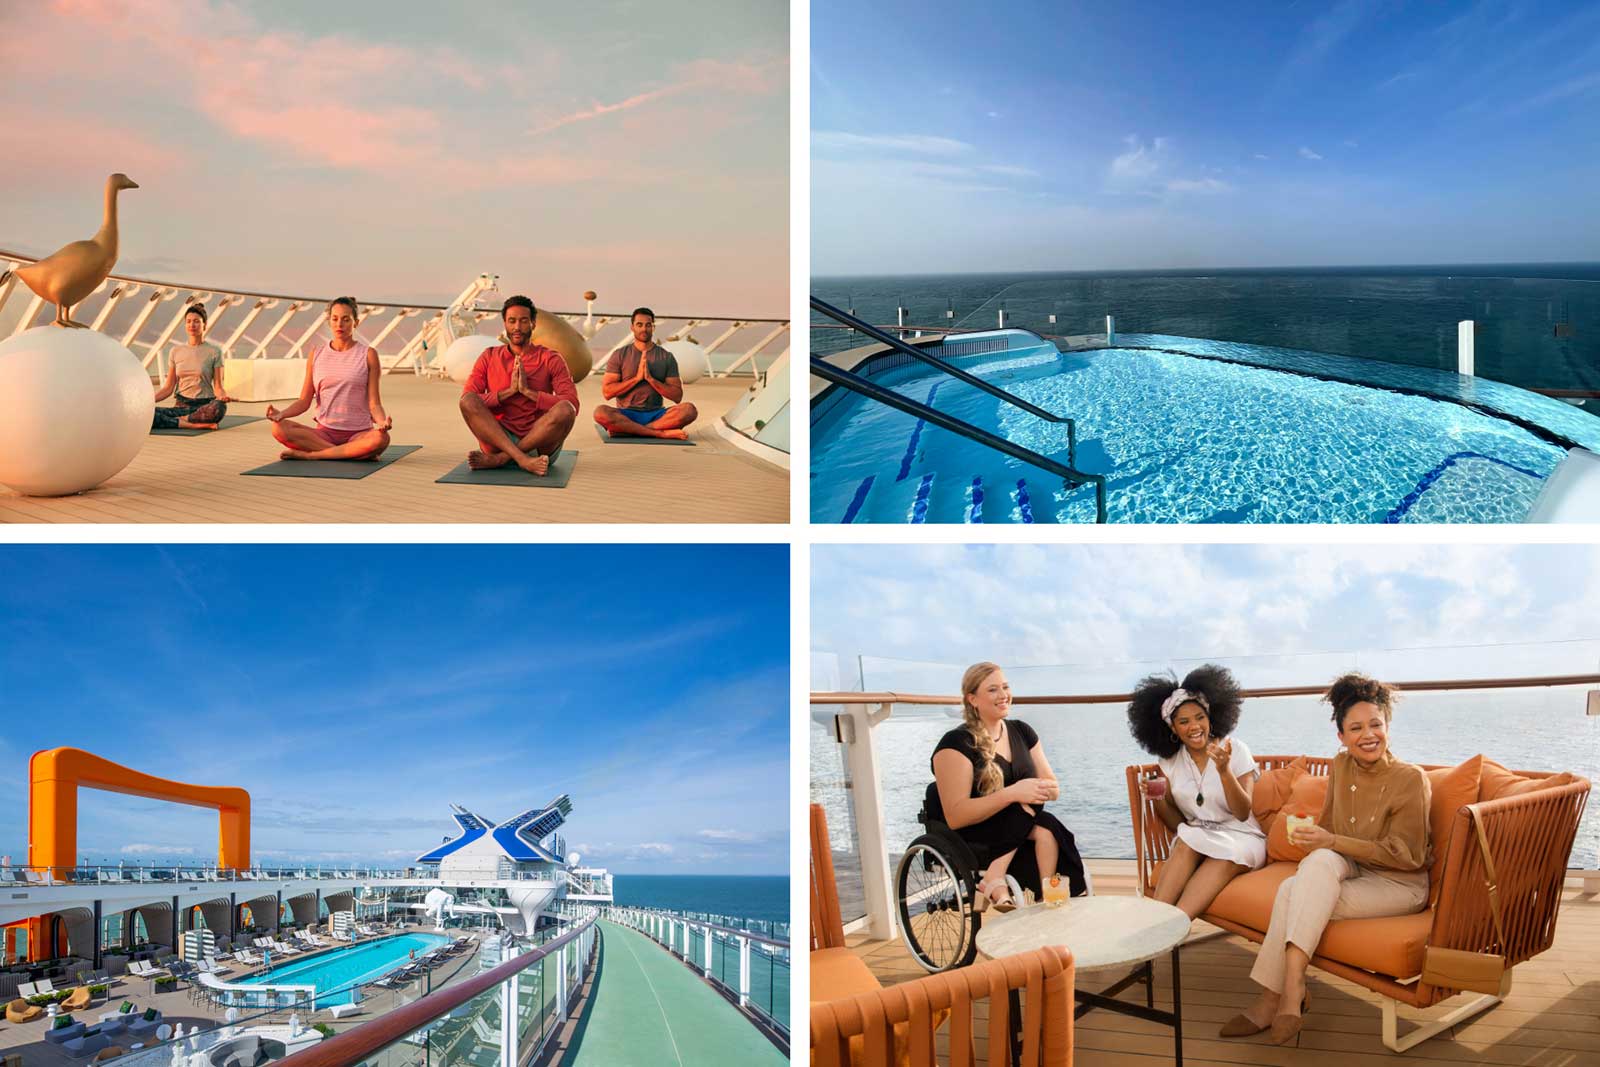 3 Find your balance onboard Celebrity from Sunrise Yoga to Afternoon Cocktails 